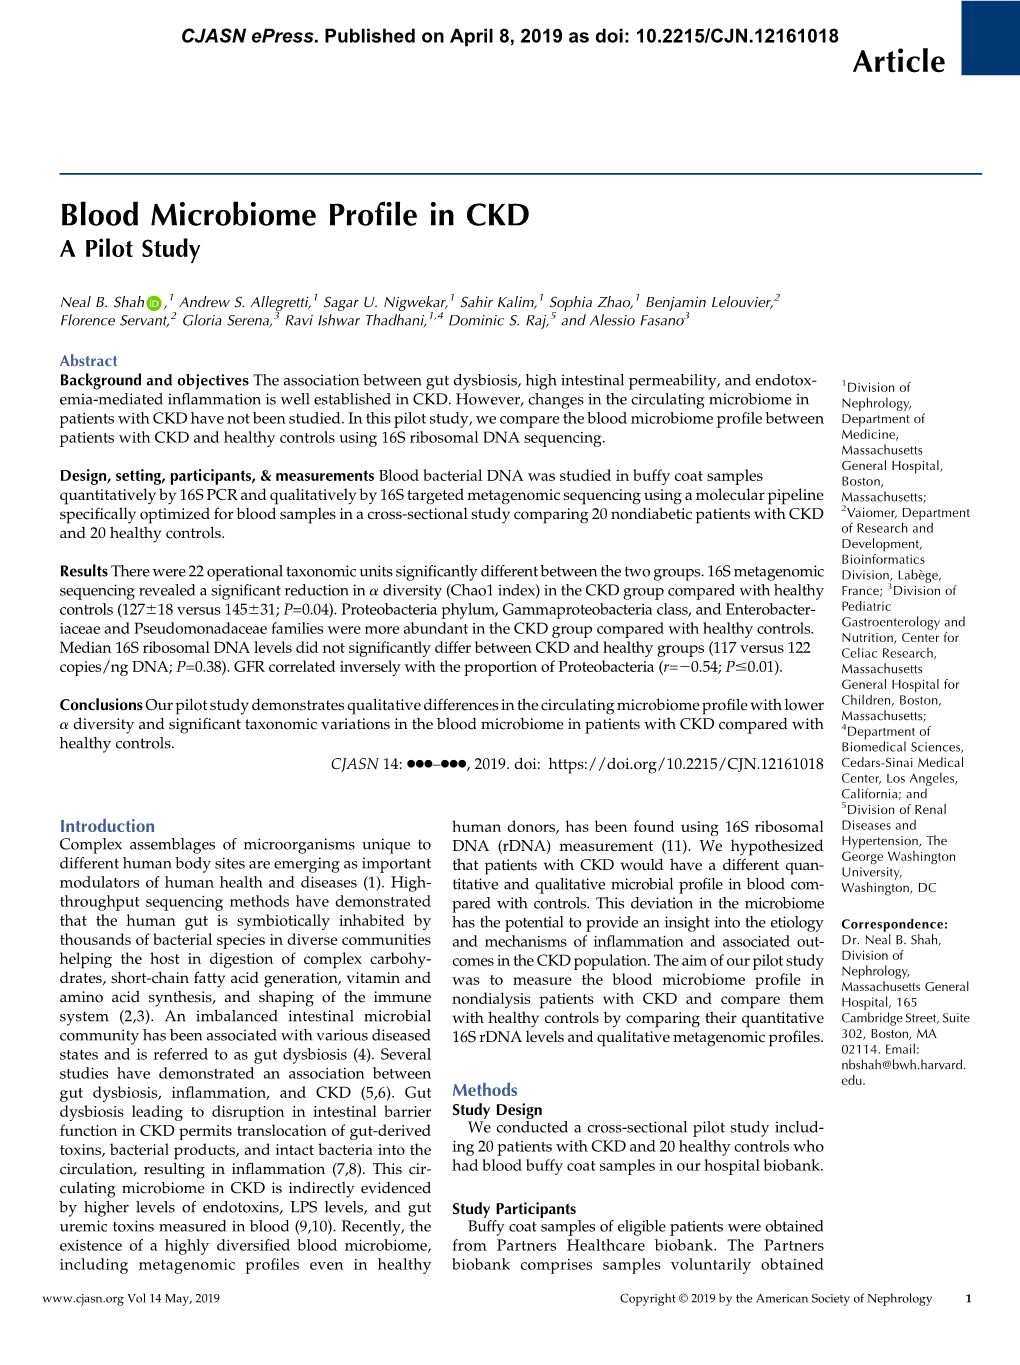 Blood Microbiome Profile In